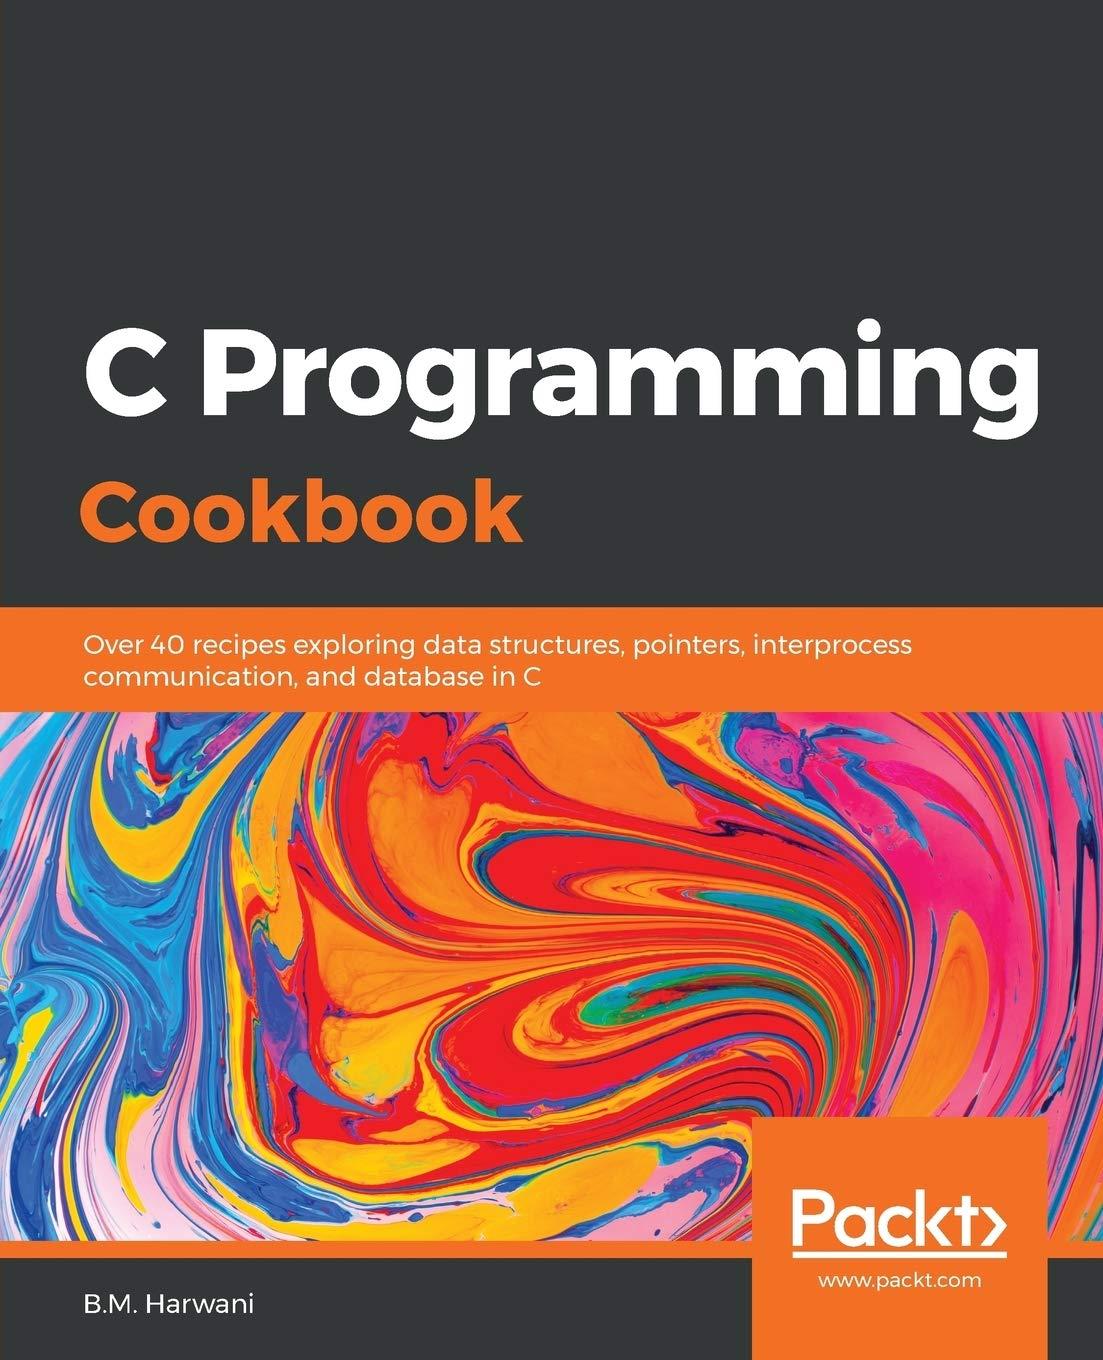 c programming cookbook over 40 recipes exploring data structures pointers interprocess communication and